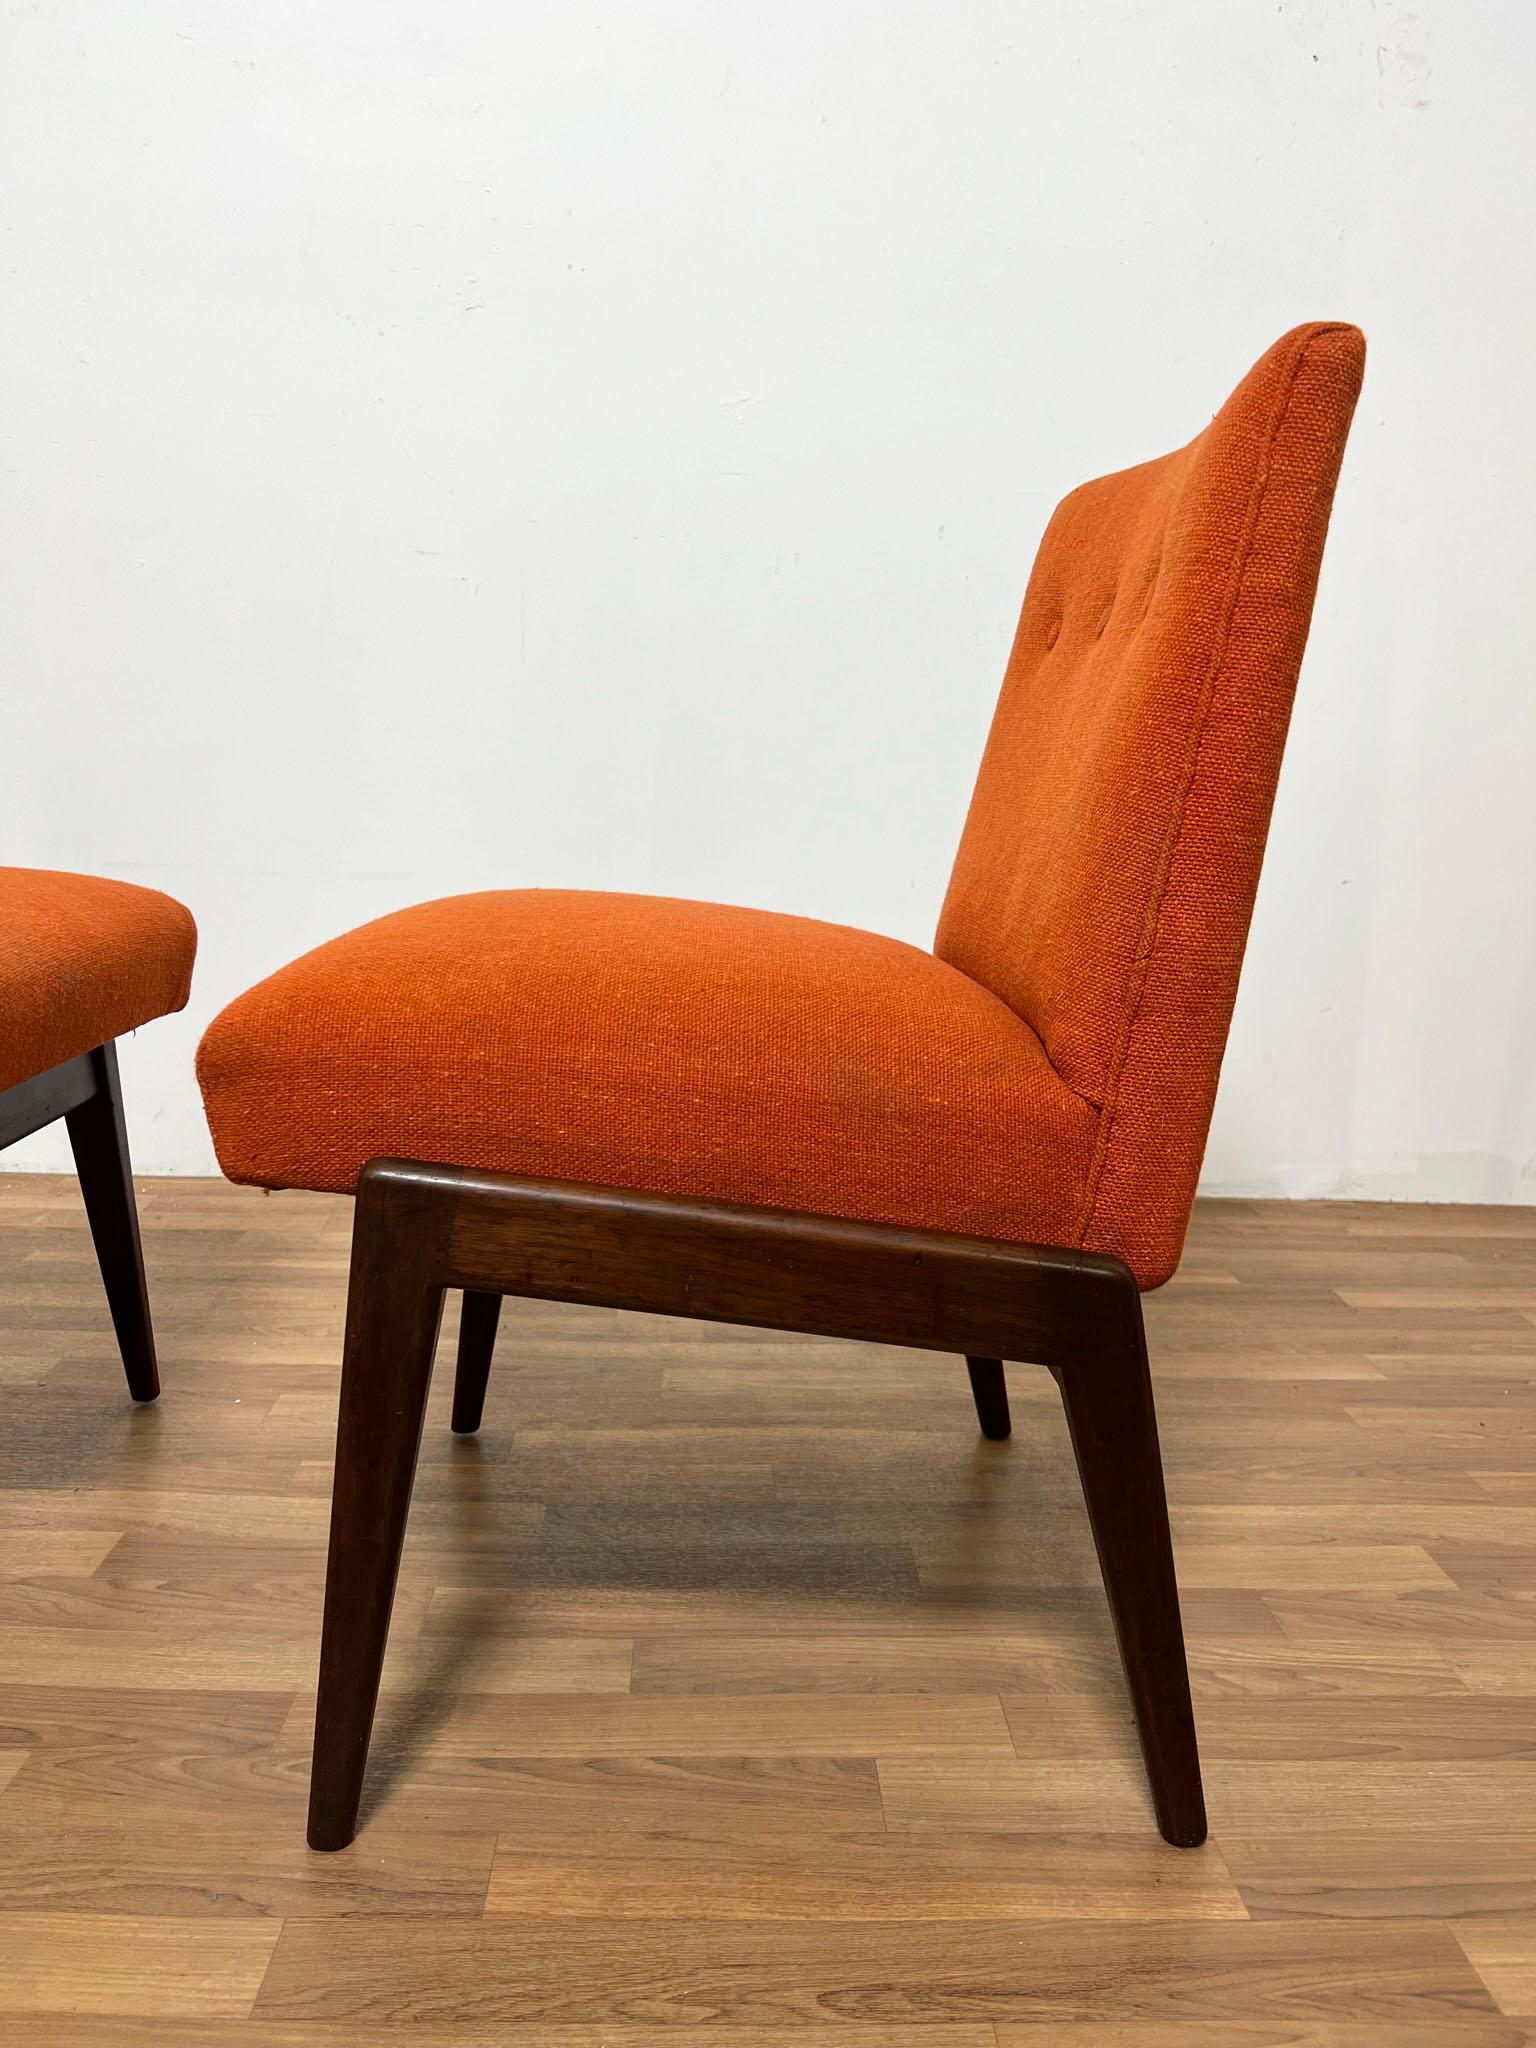 American Pair of Jens Risom C-220 Lounge Chairs Circa 1950s For Sale